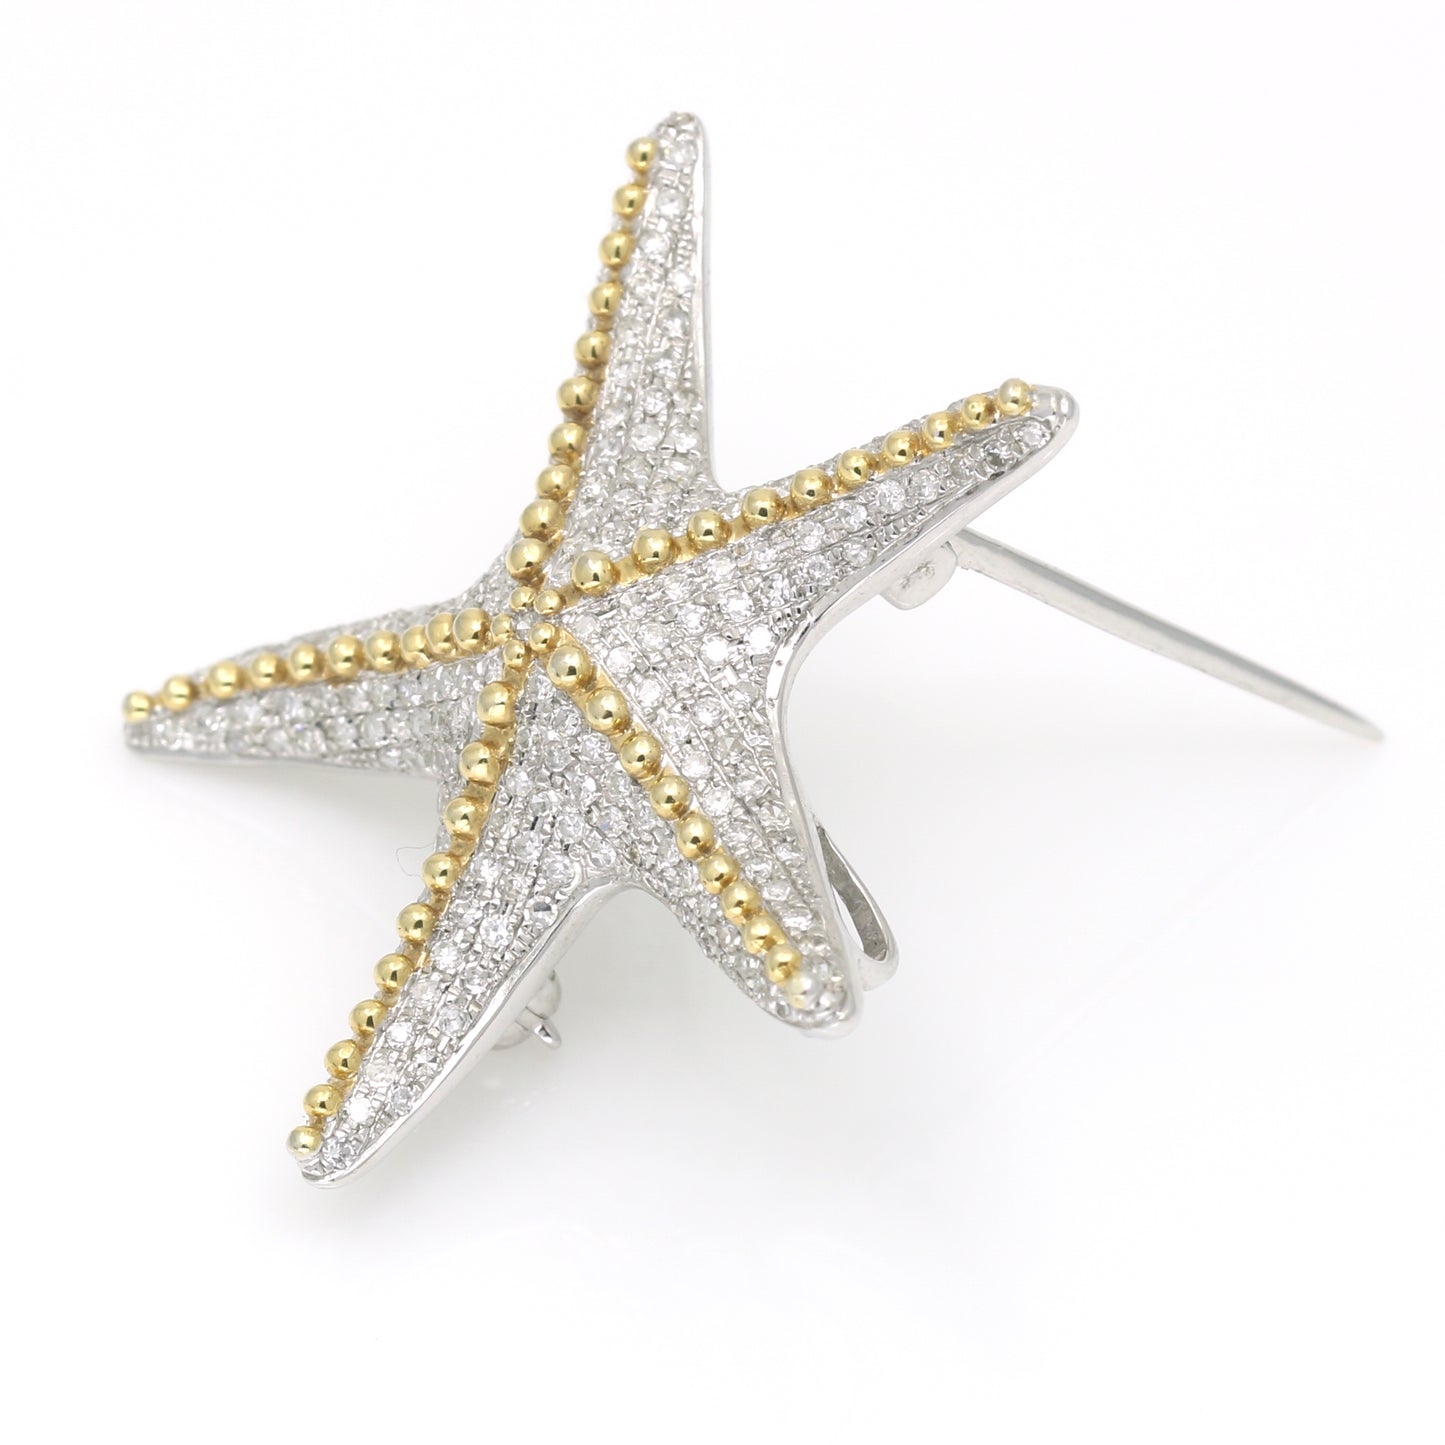 Sparkling Pave Diamond Starfish Brooch Pendant in 14k Yellow and White Gold